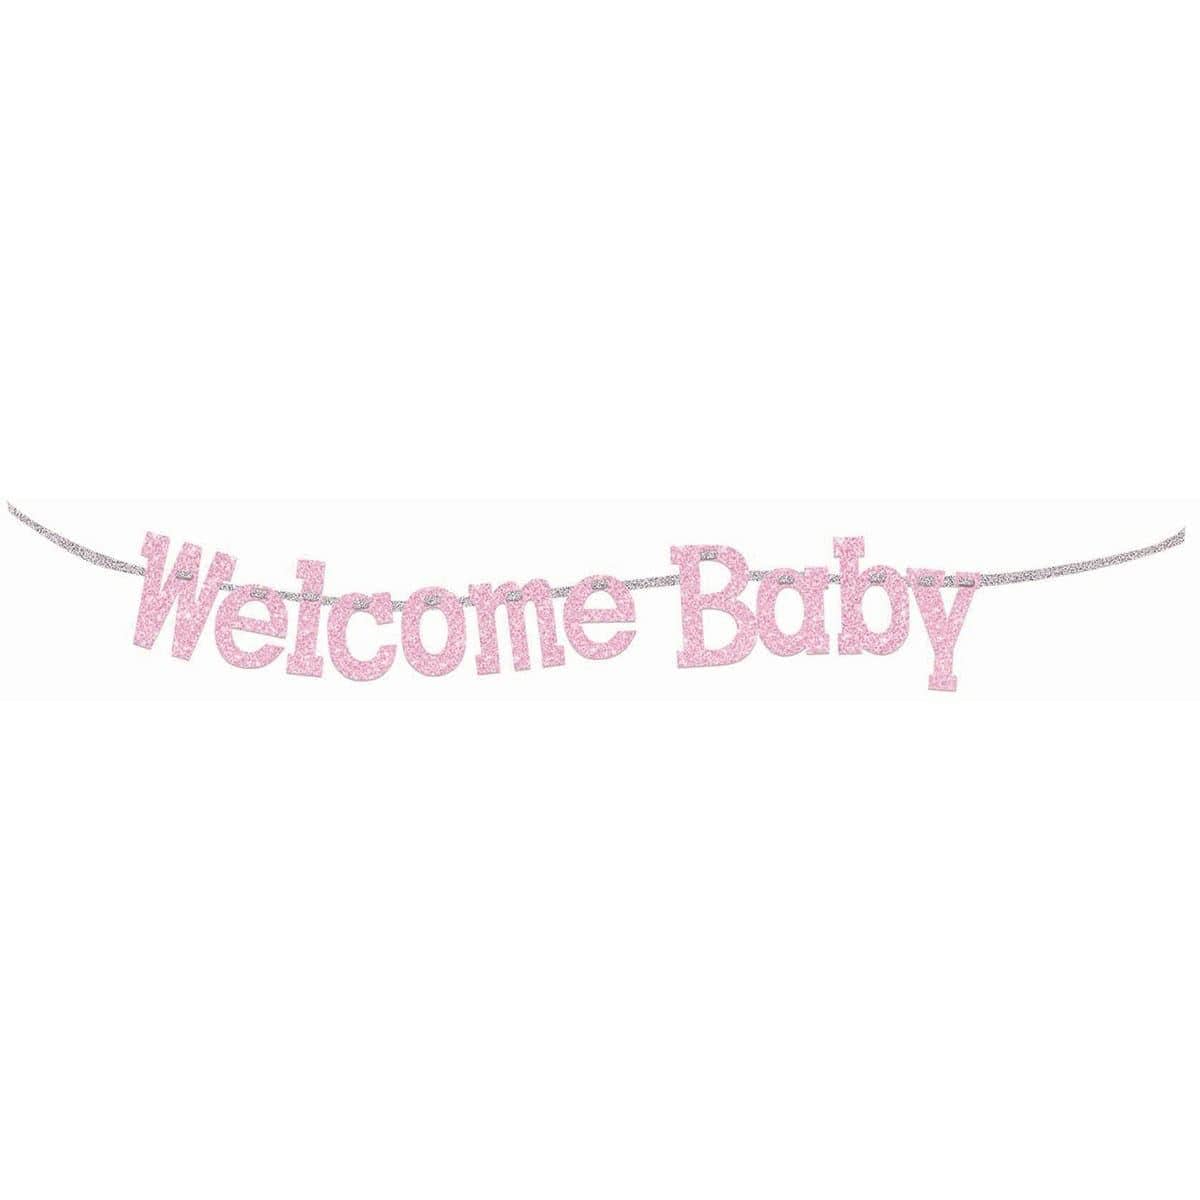 Welcome baby Pink banner